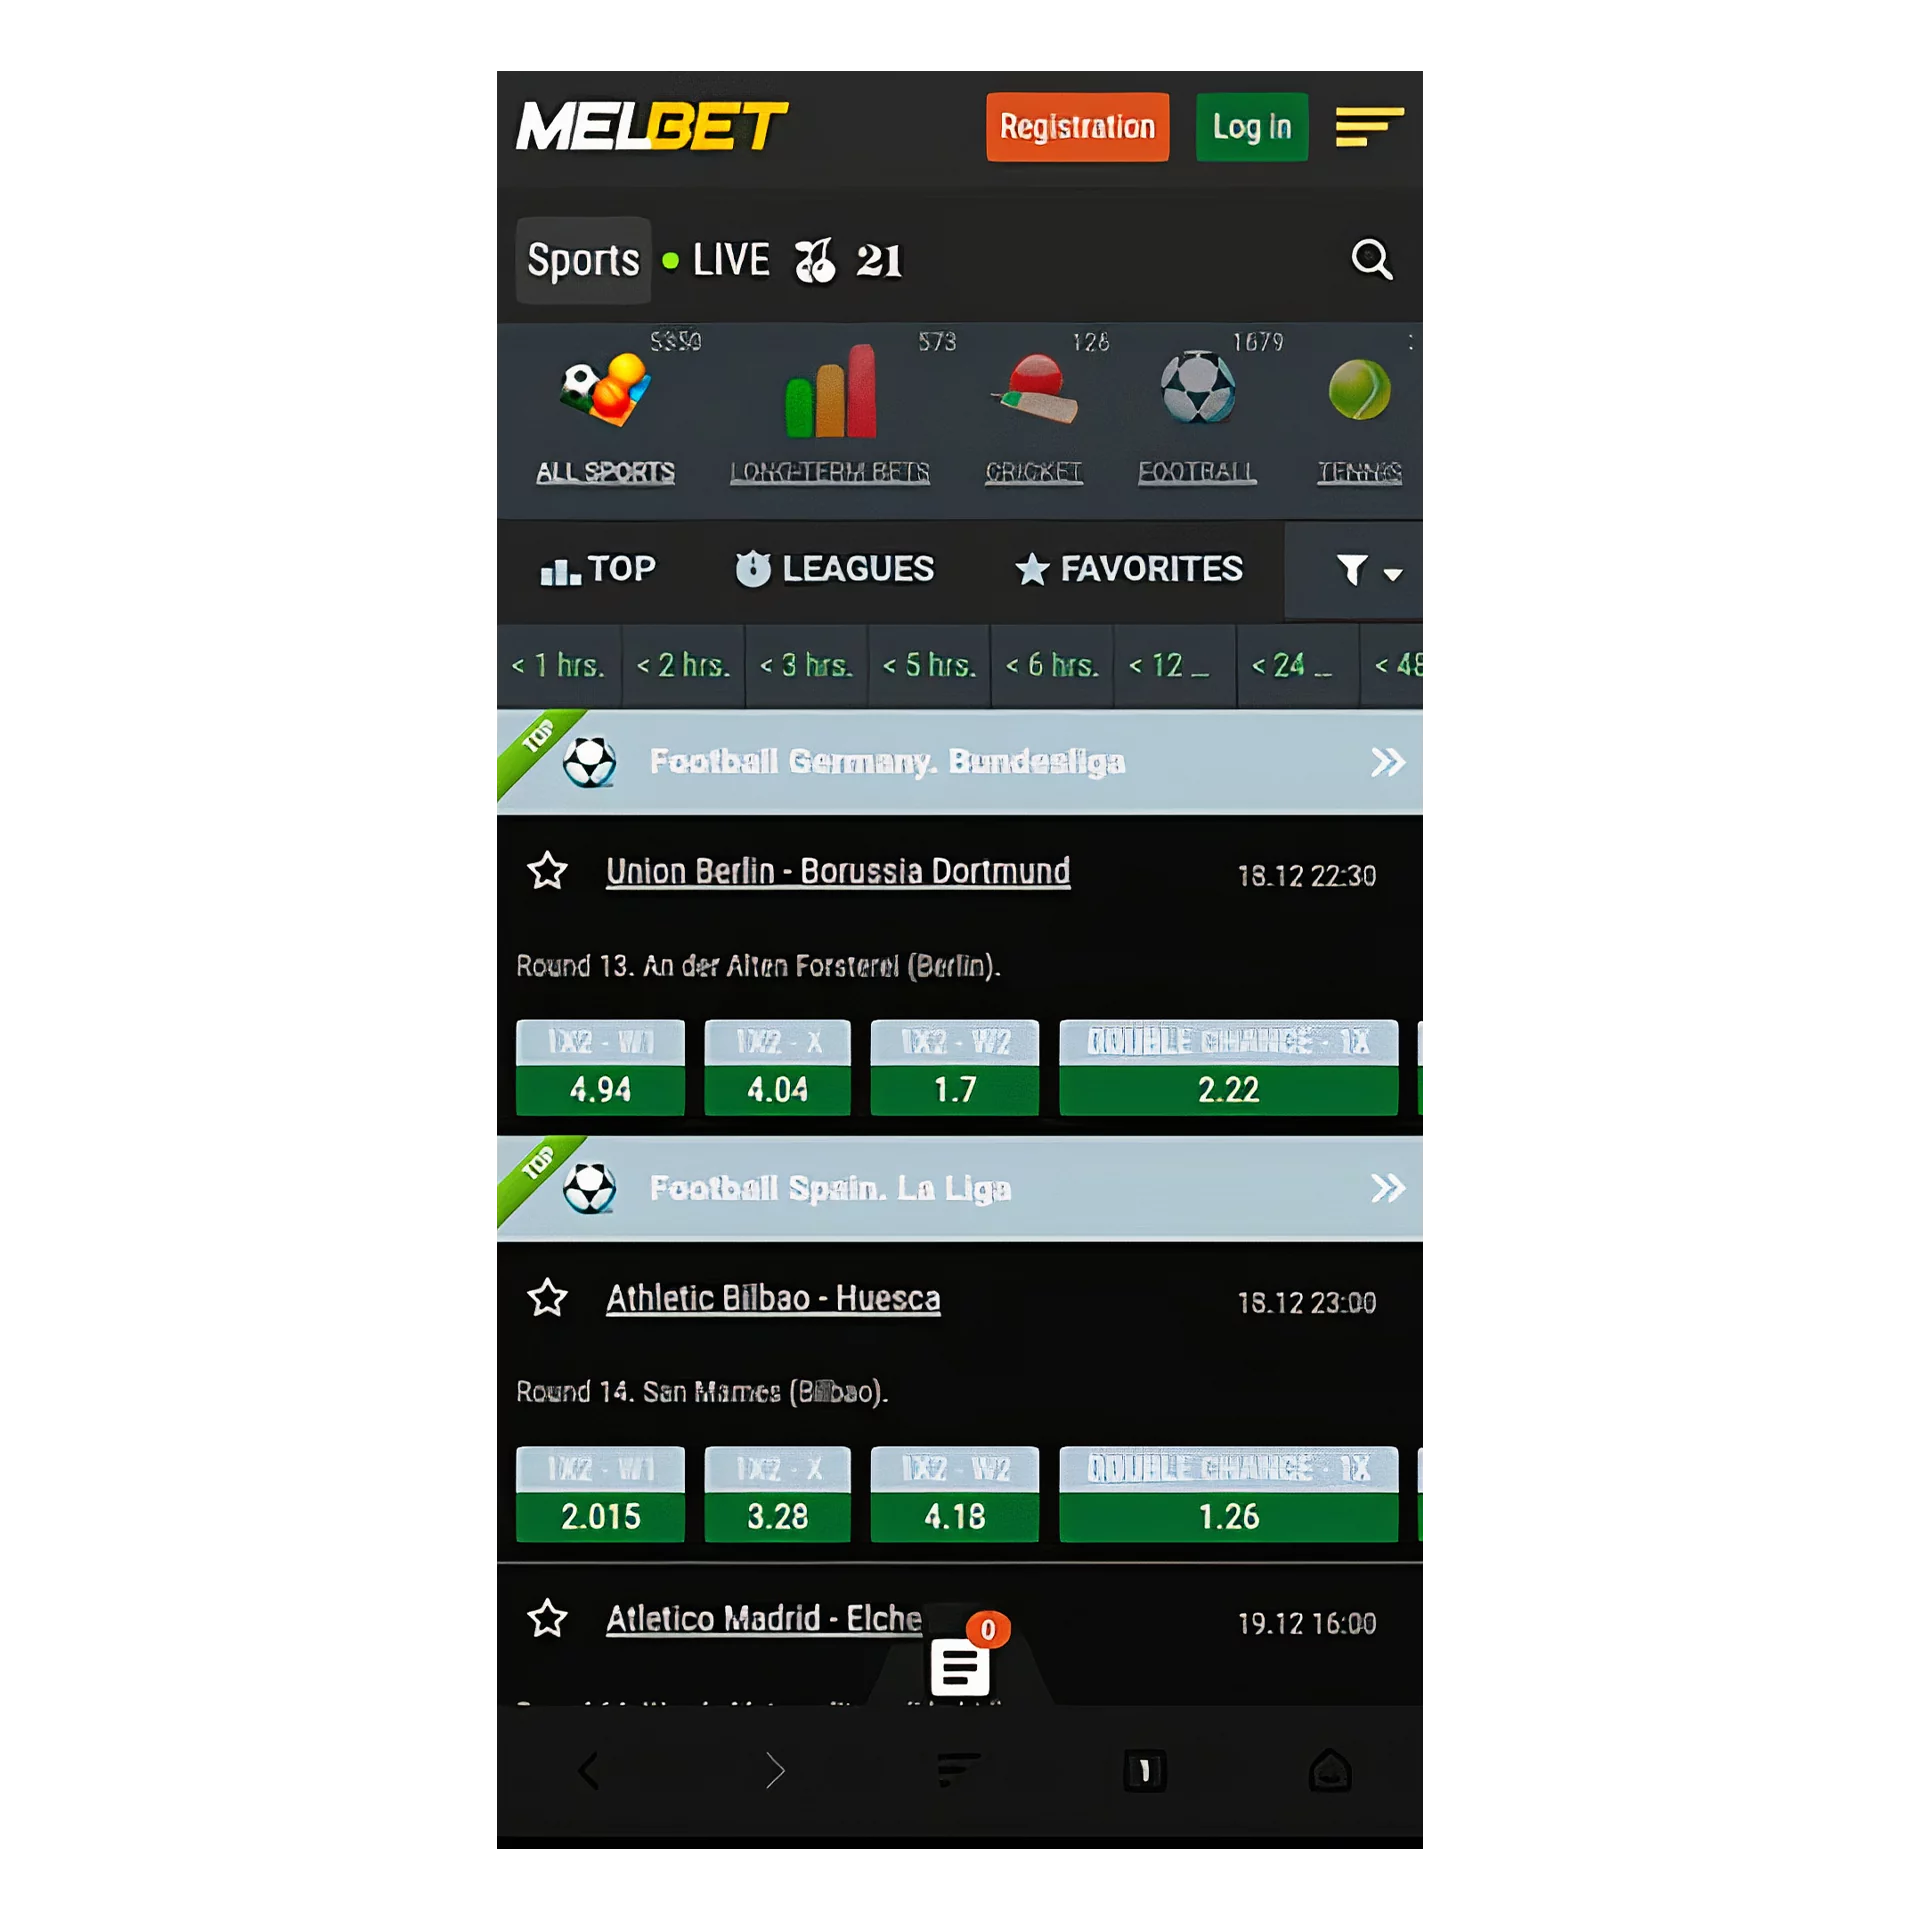 Now you can place bets via the Melbet mobile app for Android.